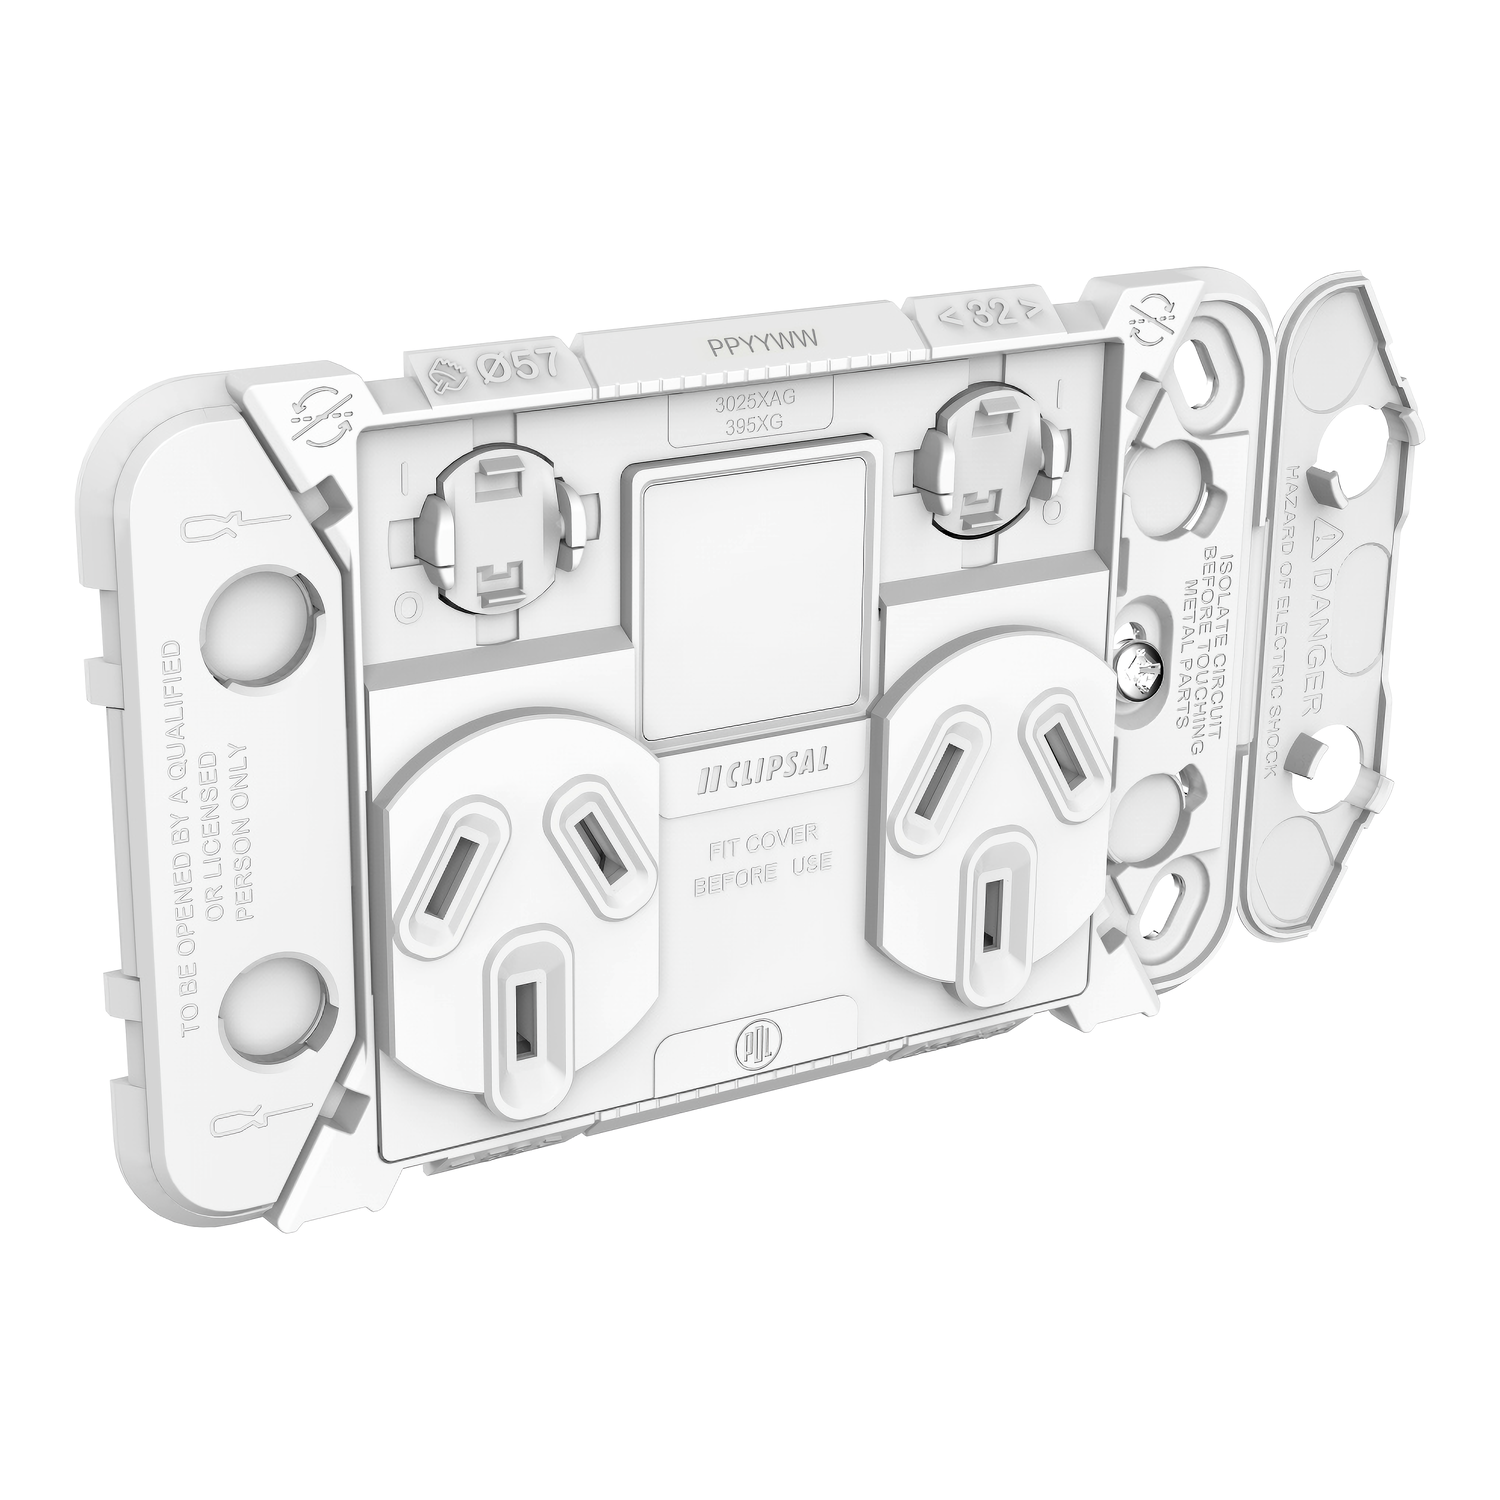 PDL Iconic Double Switch Power Point Grid with 1 extra switch, Horizontal Mount, 250V, 10A